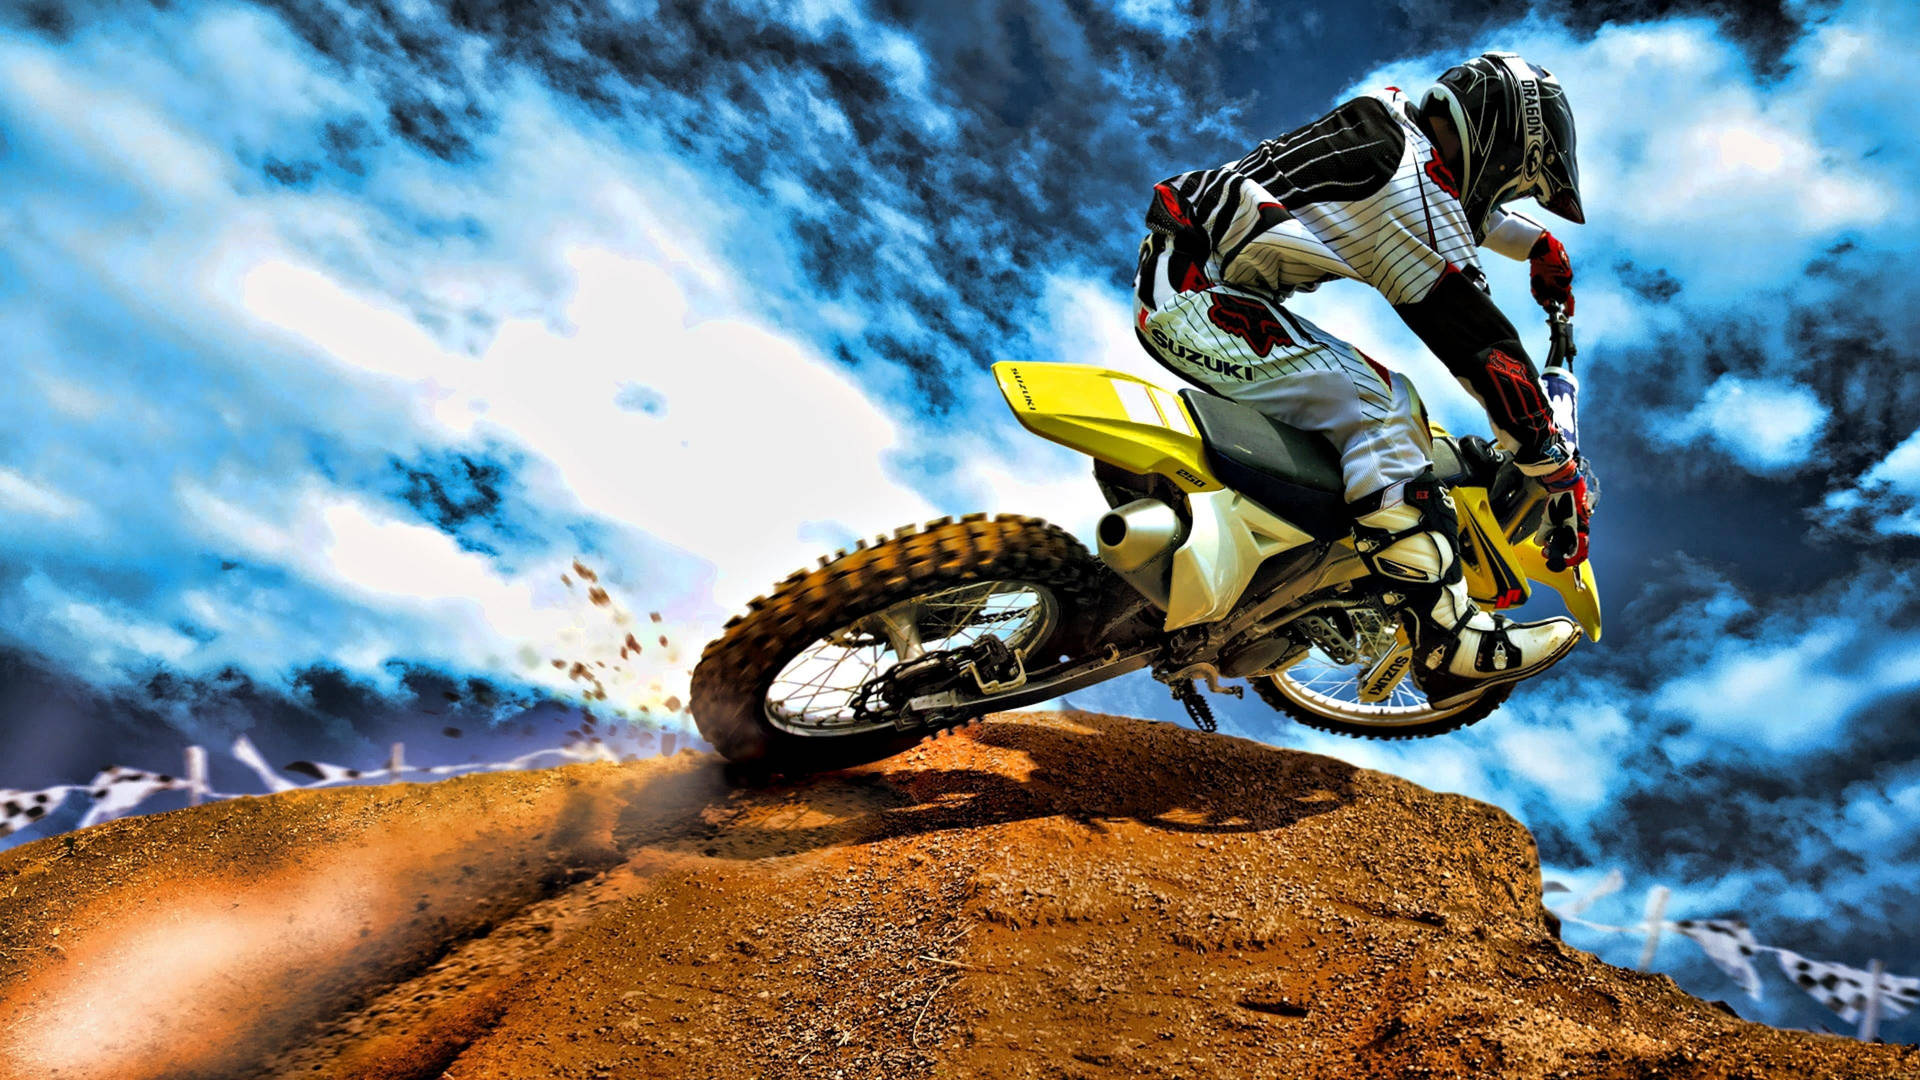 Extreme Sports Motocross Dirt Bike Picture